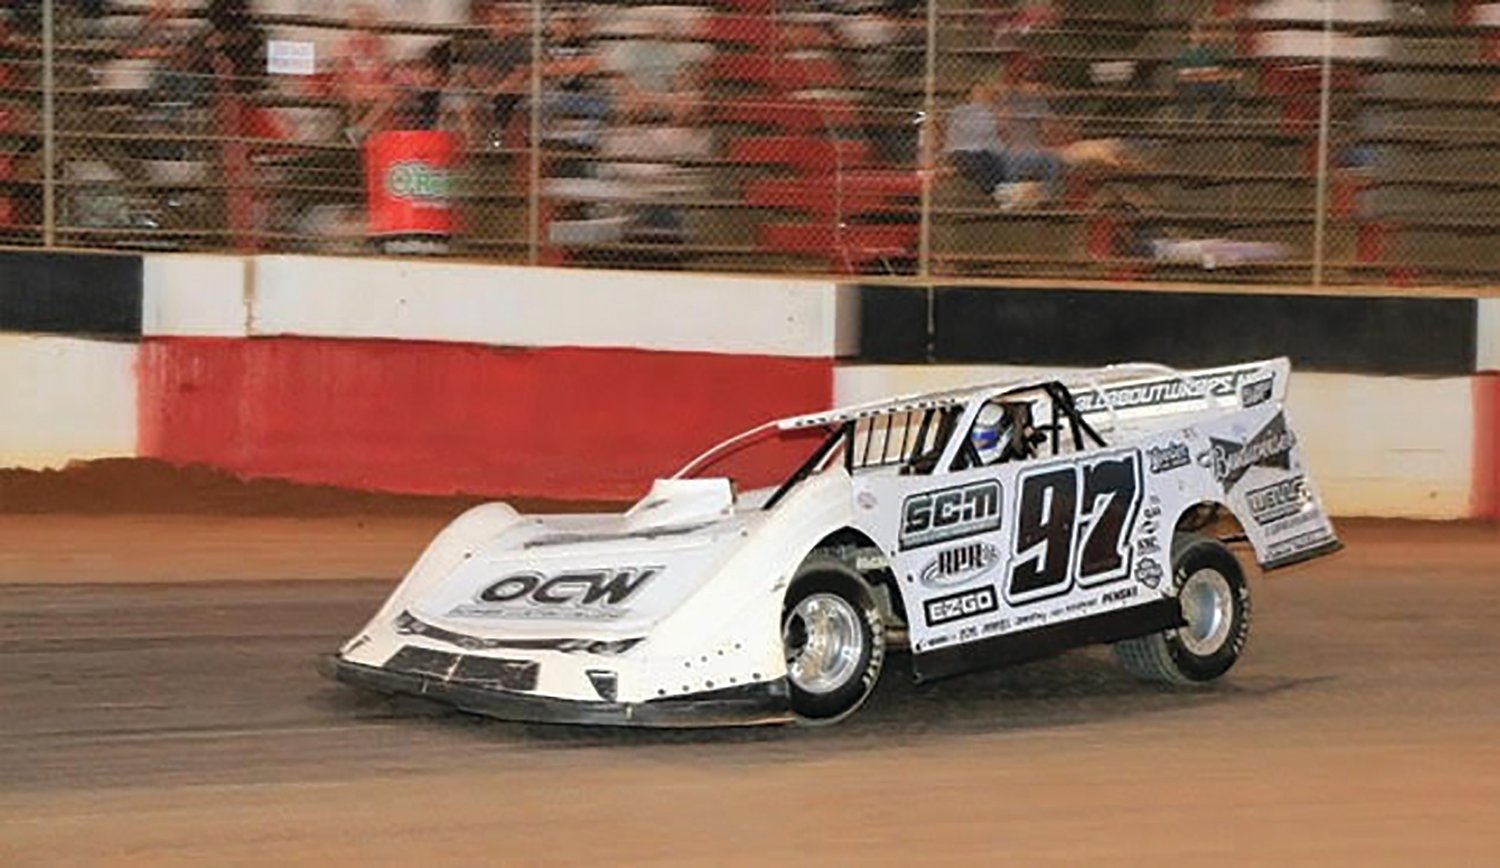 Swainsboro Raceway held another race | Emanuel County Live